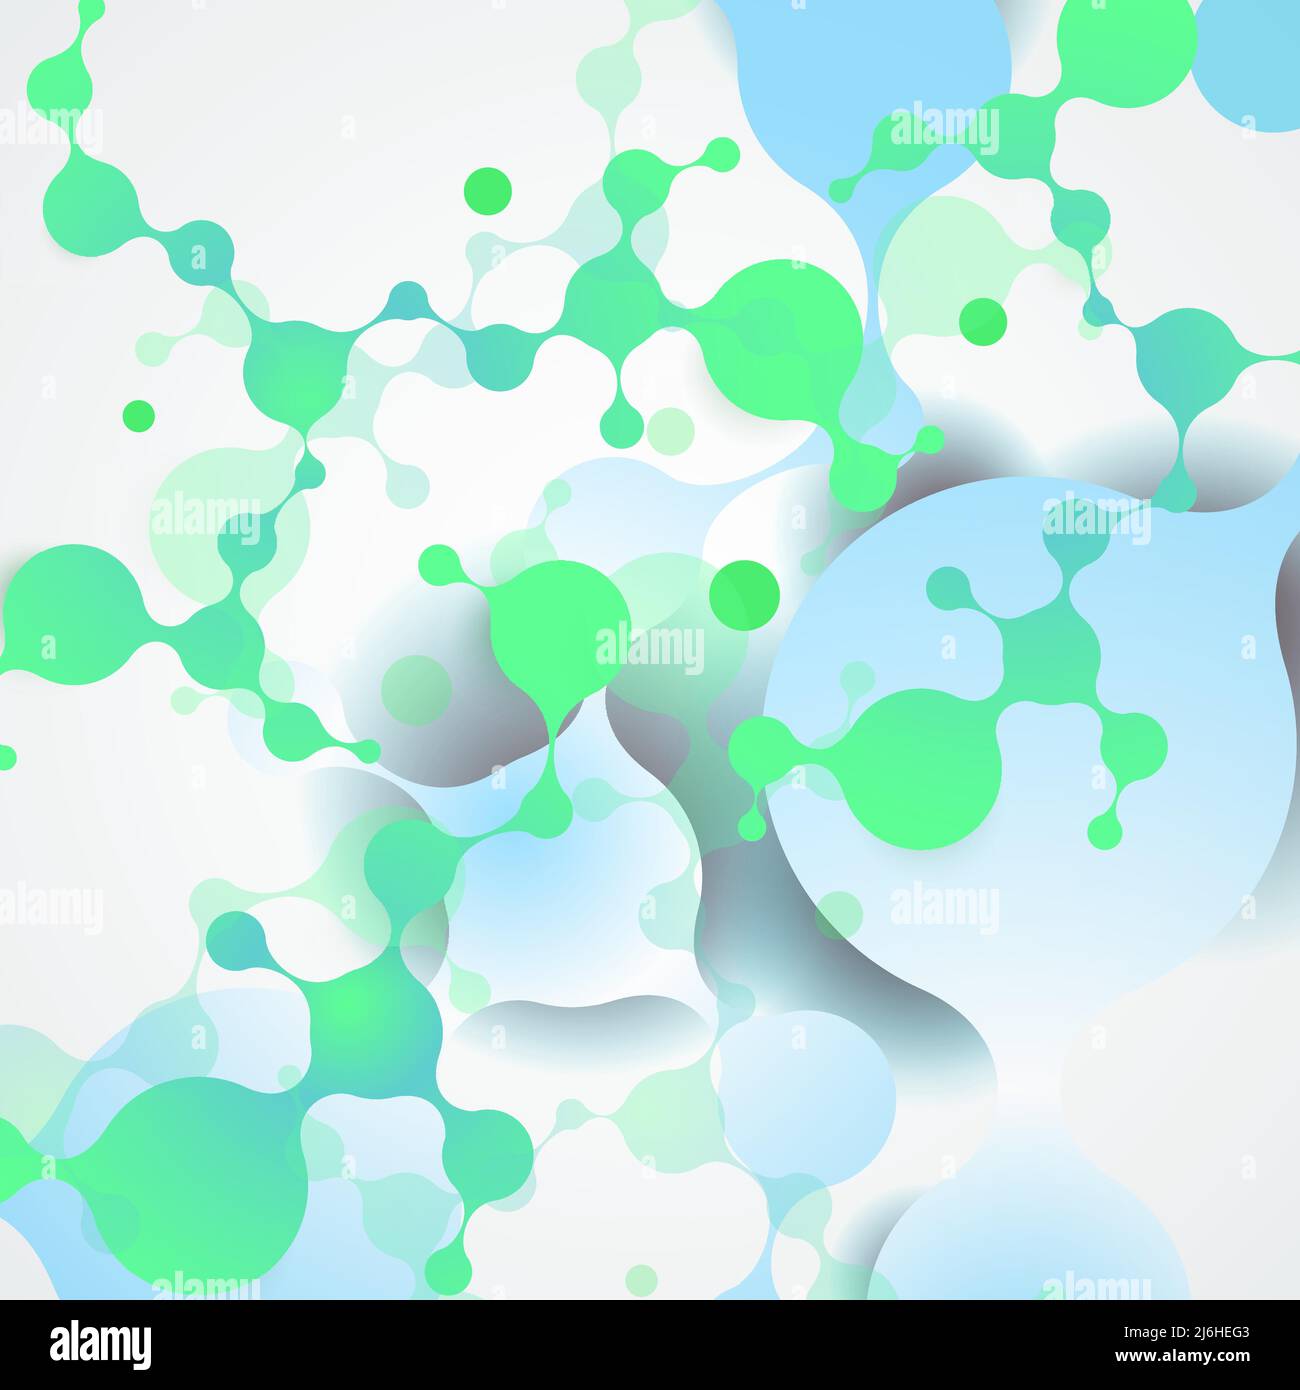 Abstract network design with molecular structure Stock Vector